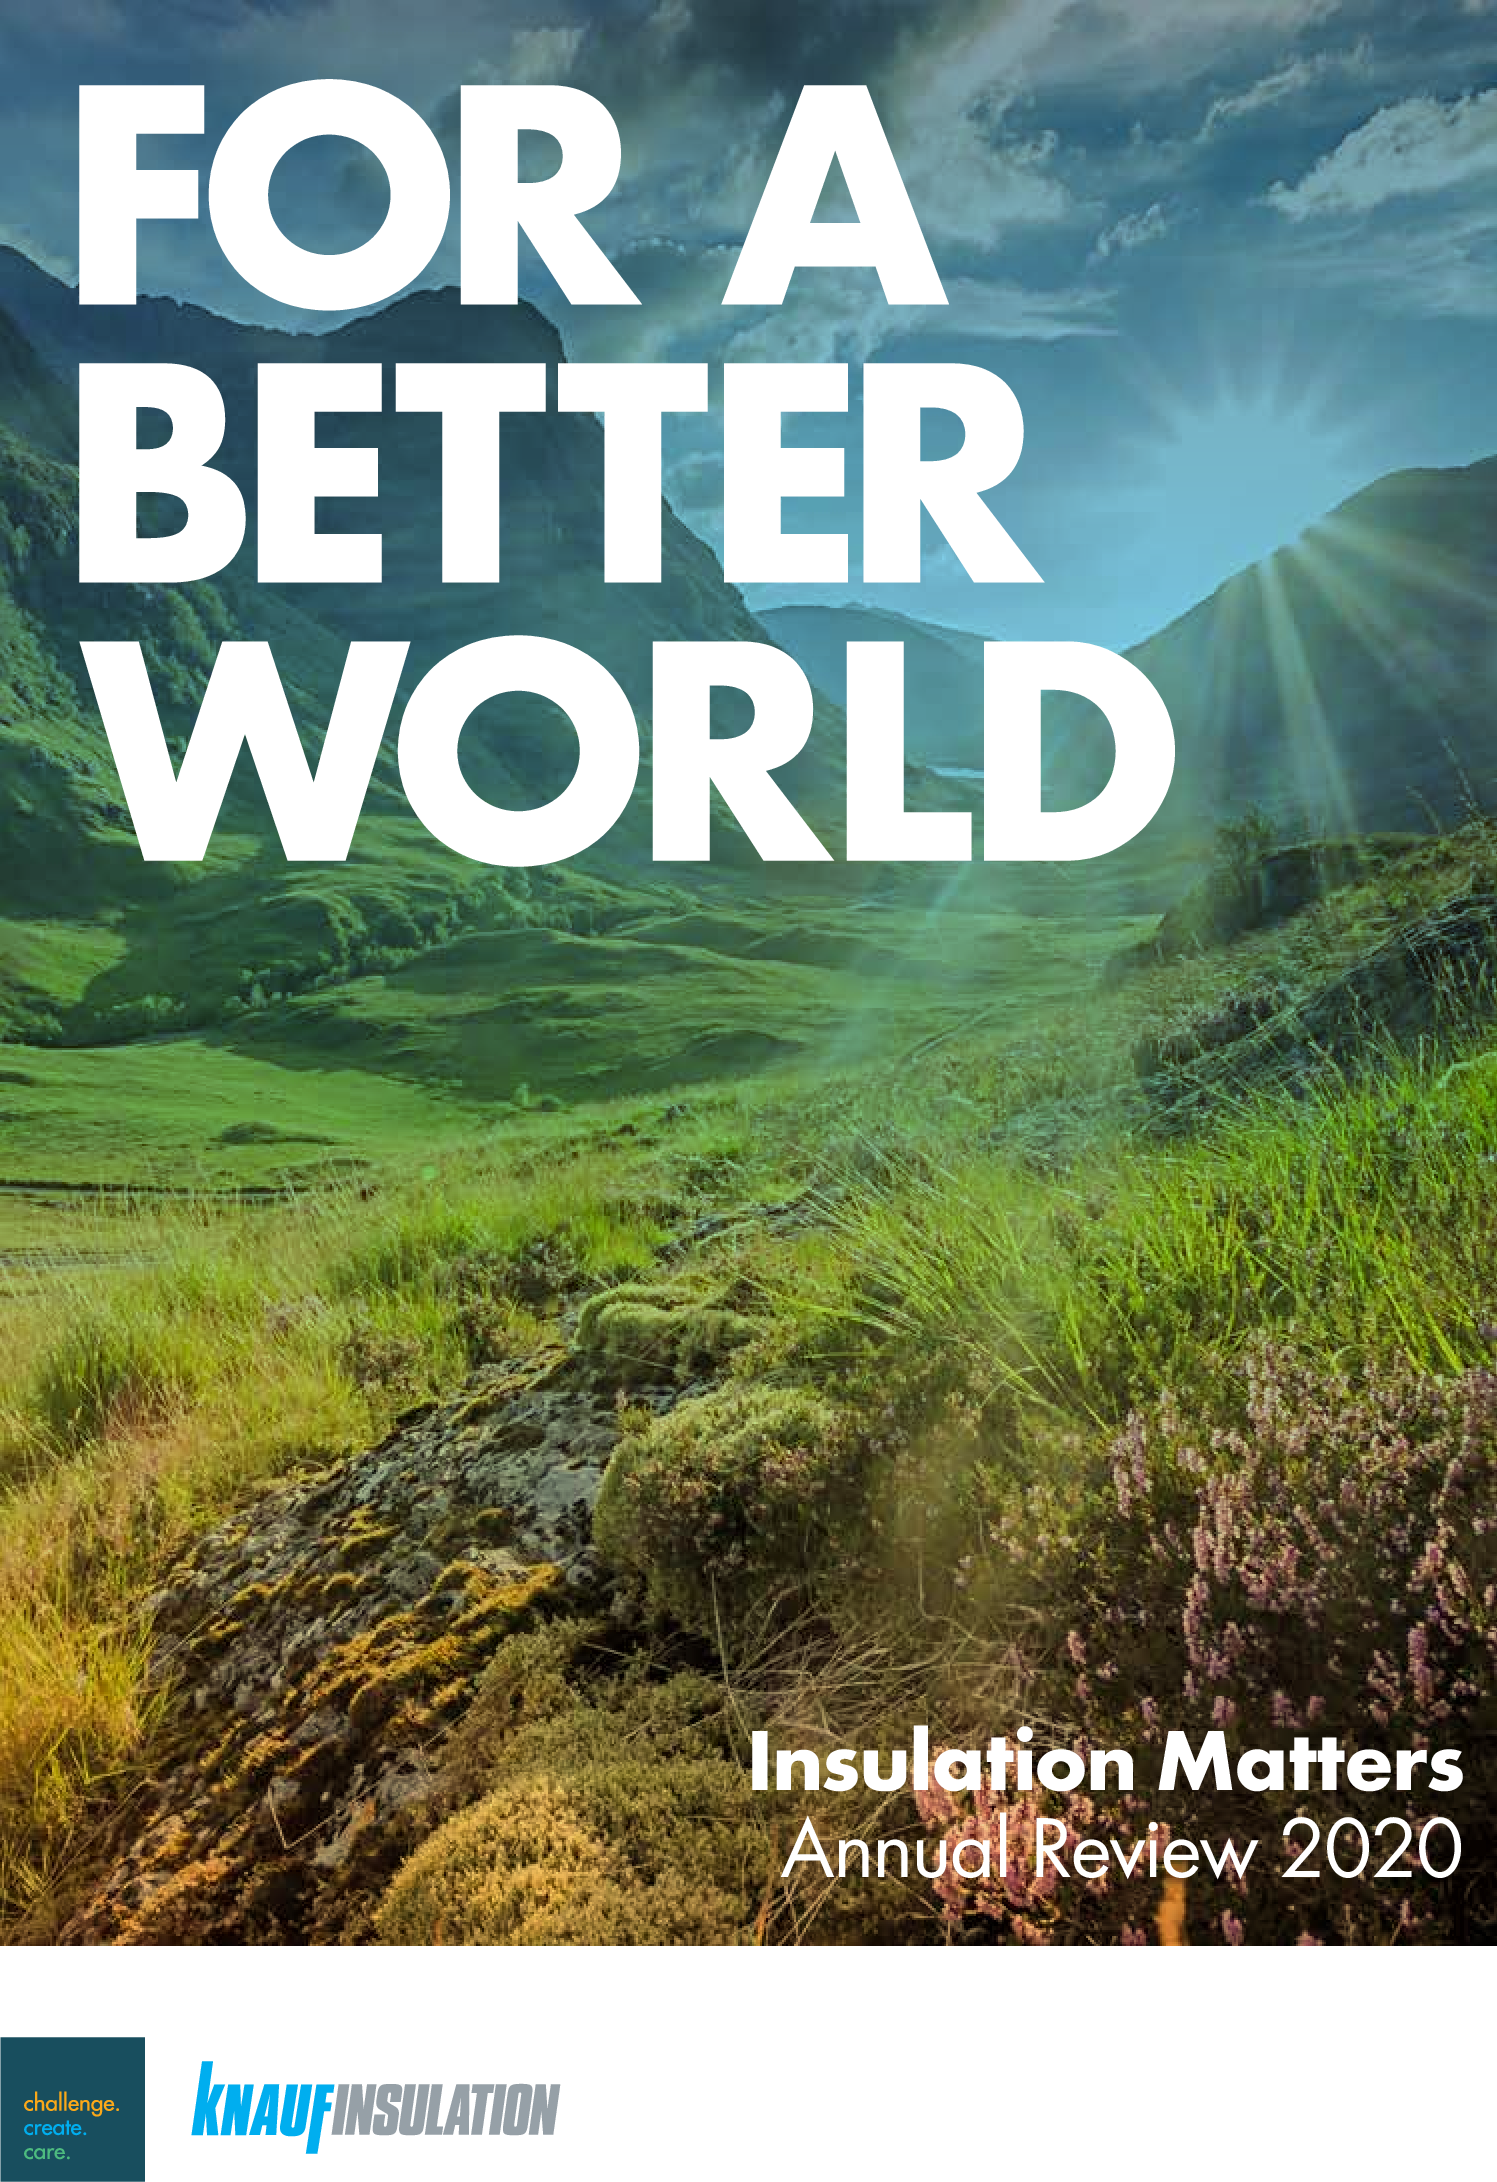 Knauf Insulation Annual Review 2020